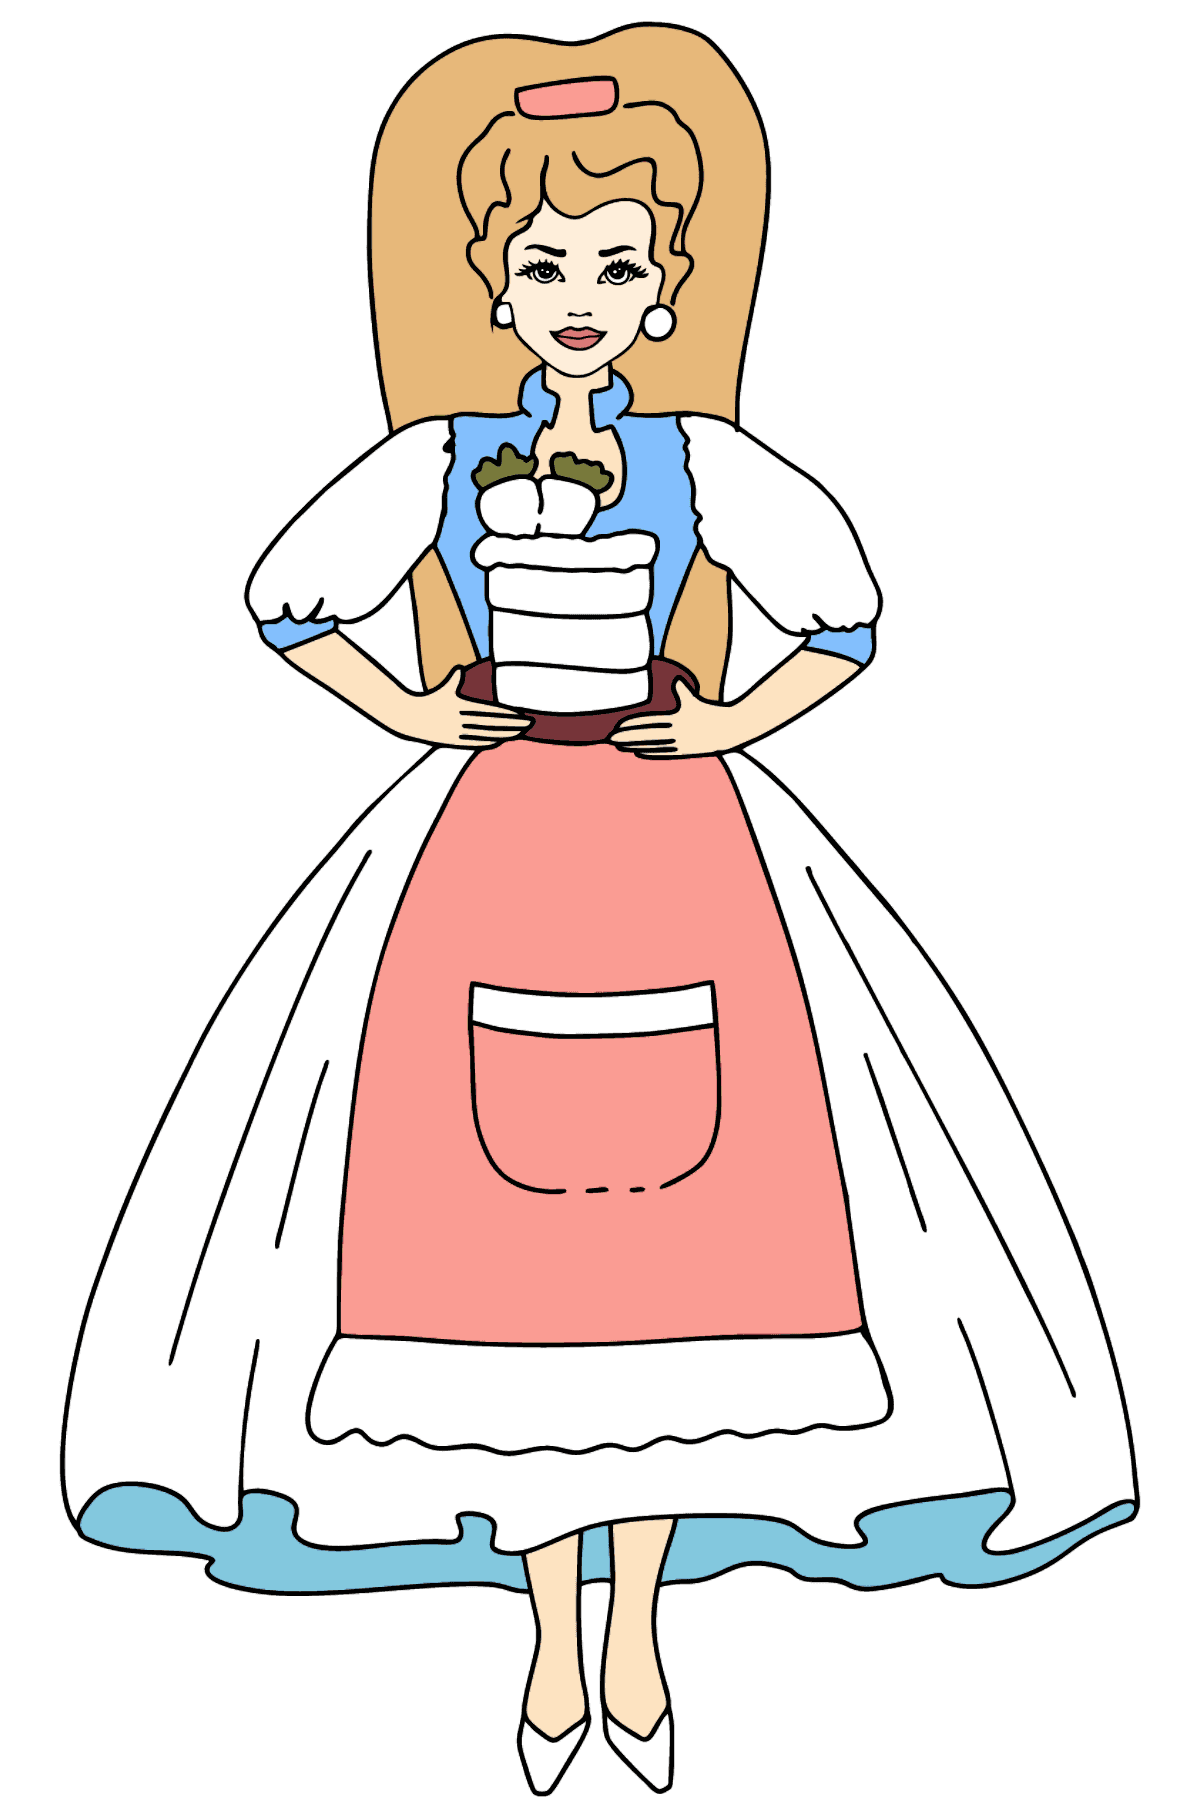 Barbie Doll and Cake coloring page - Coloring Pages for Kids